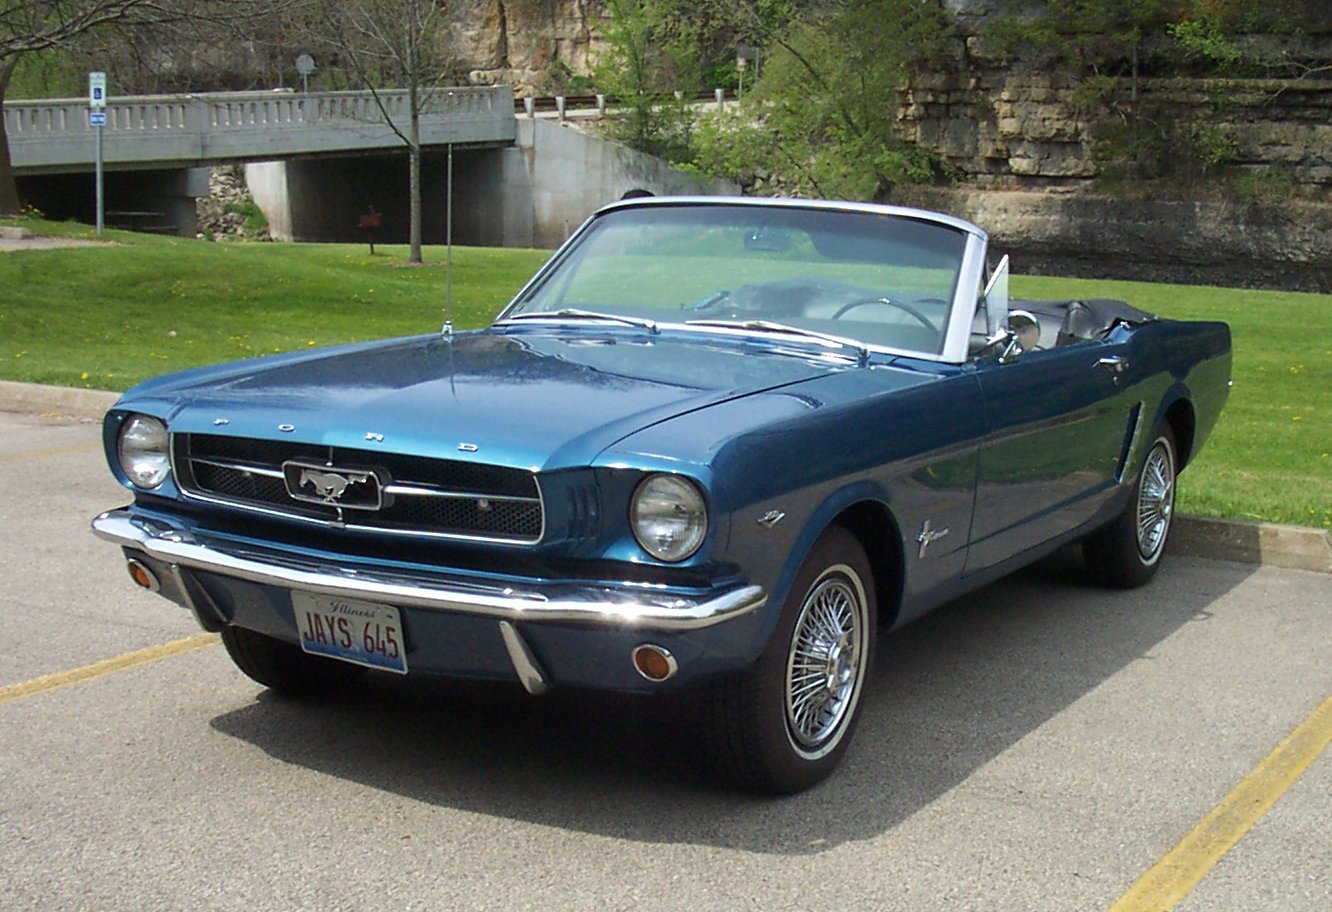 Blue Mustang Old